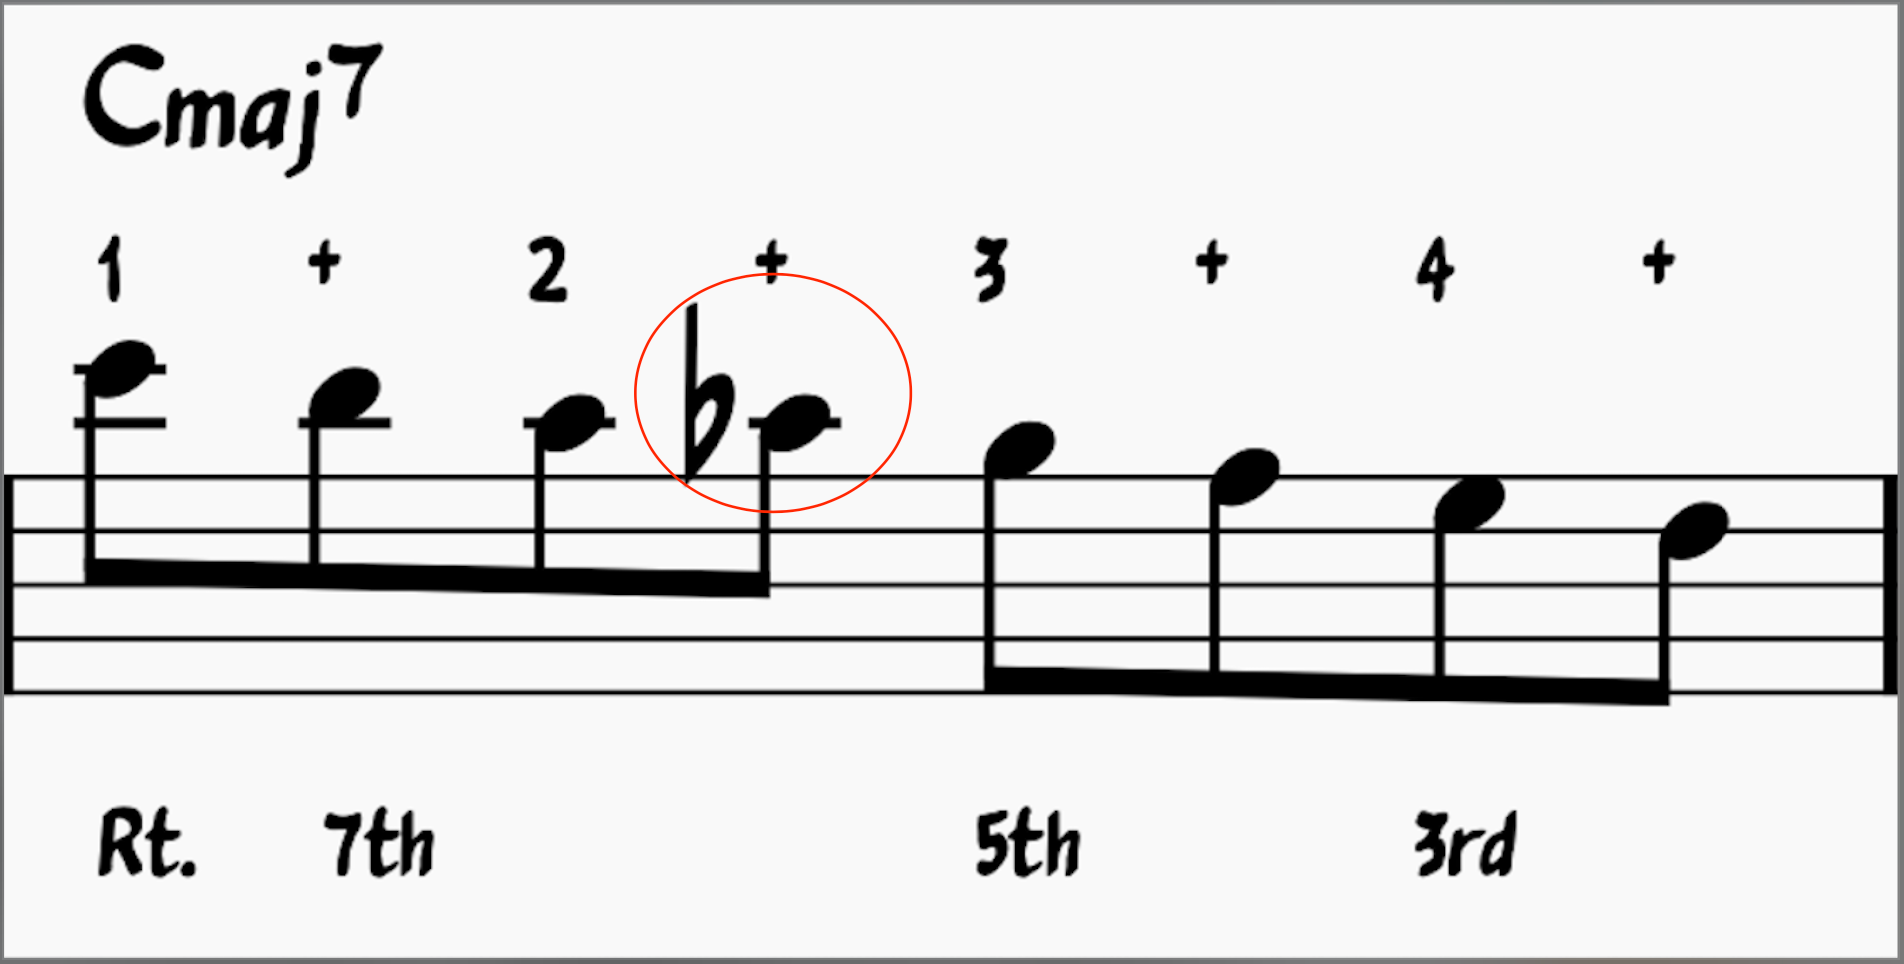 A chromatic passing note between the 6th and 5th helps keep the chord tones on strong beats